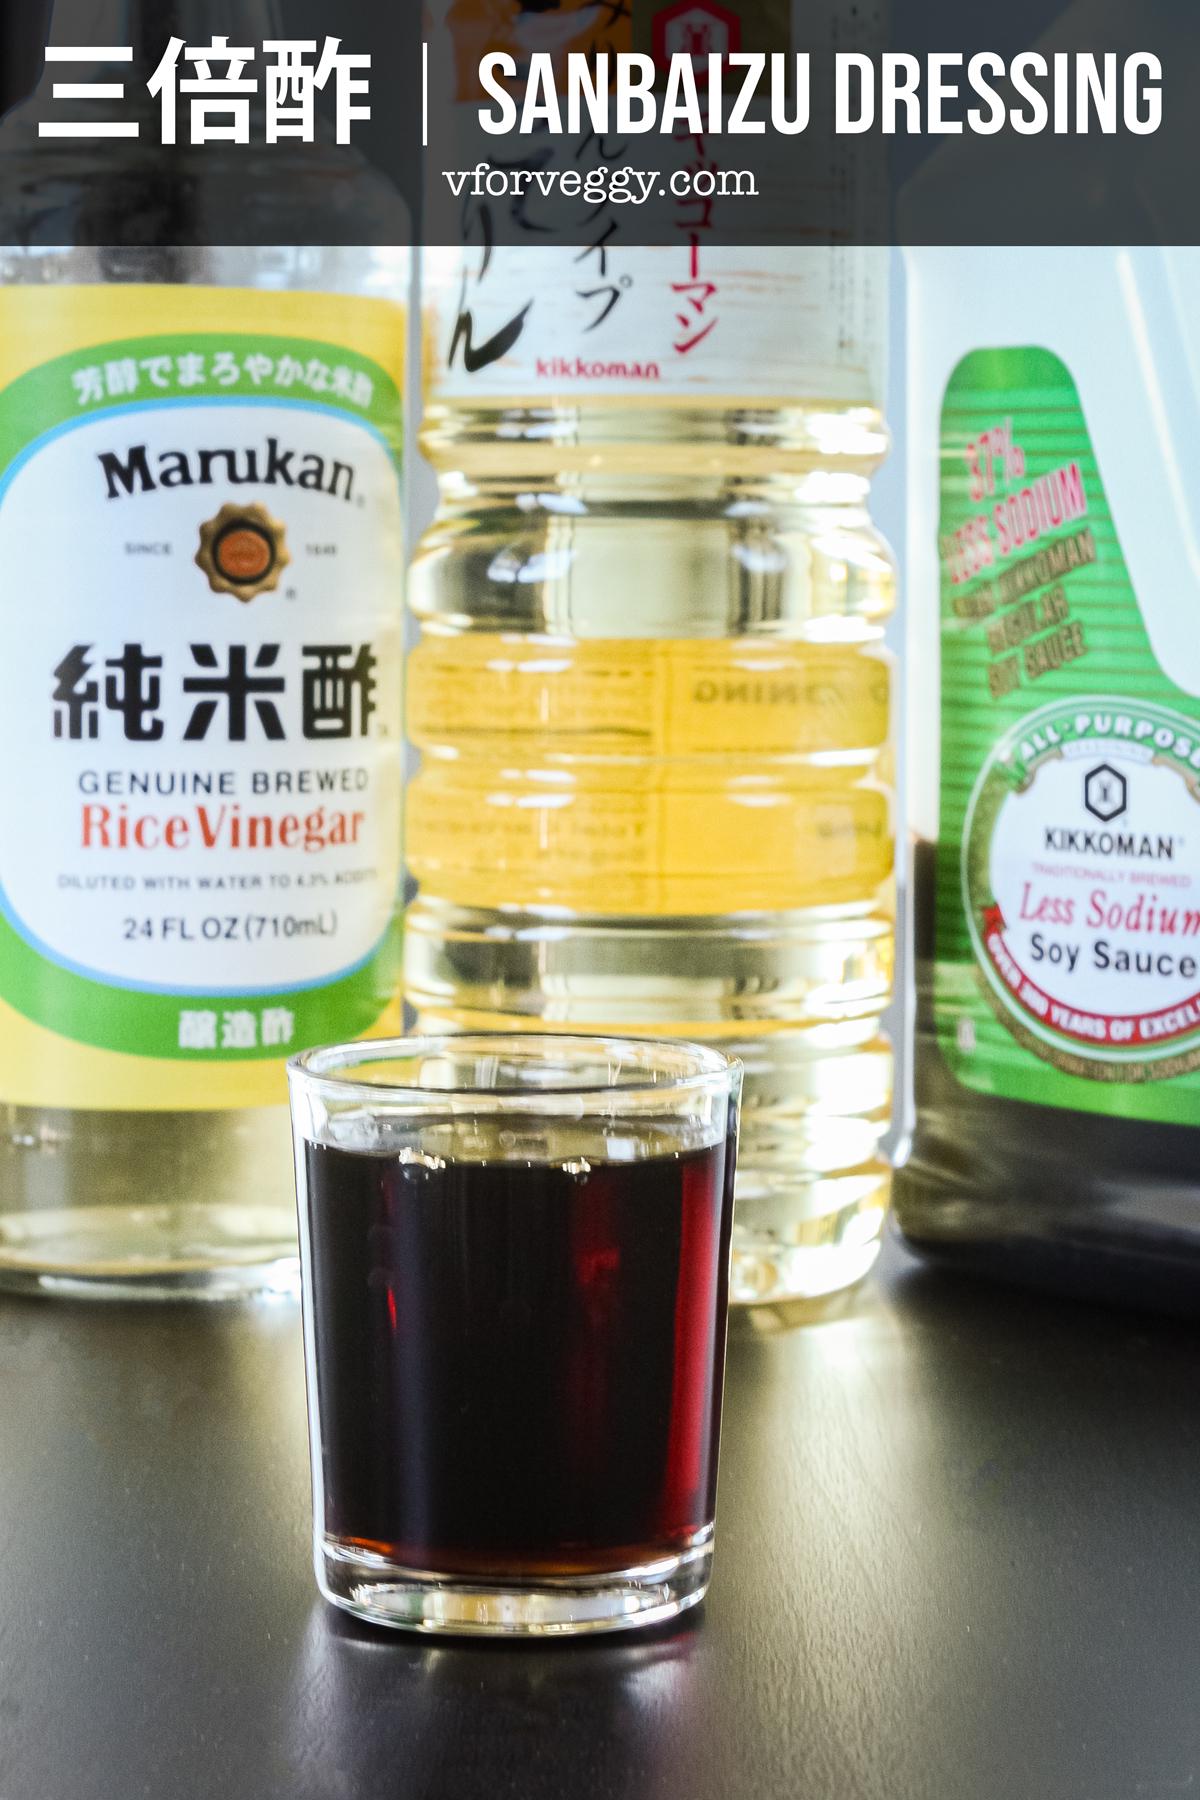 Sanbaizu dressing made with rice vinegar, soy sauce, and mirin.